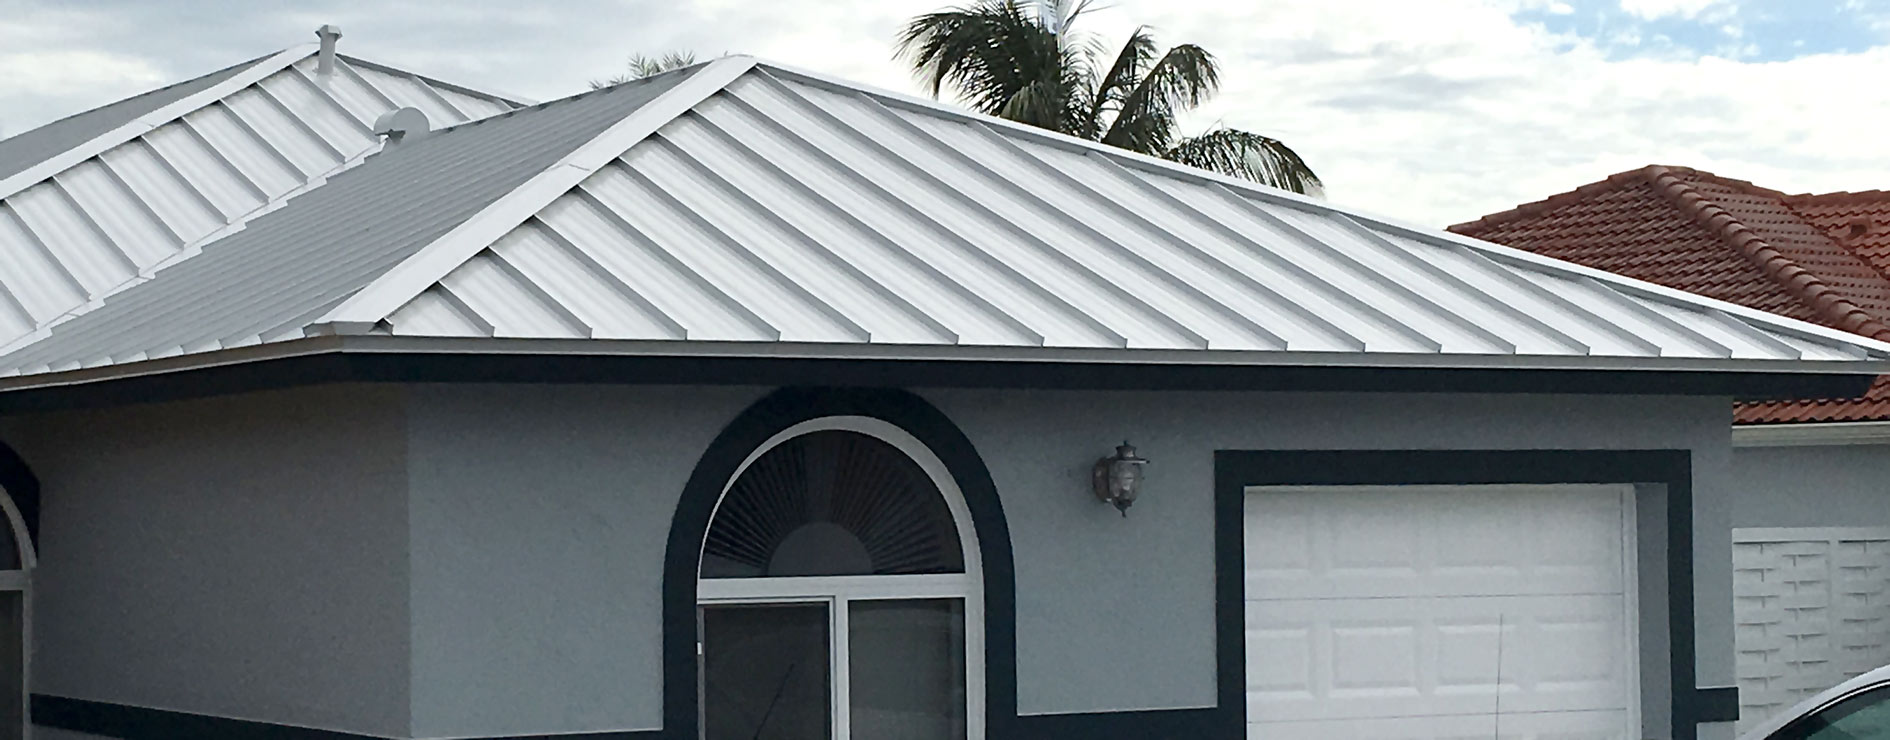 Metal Roof in Stone White